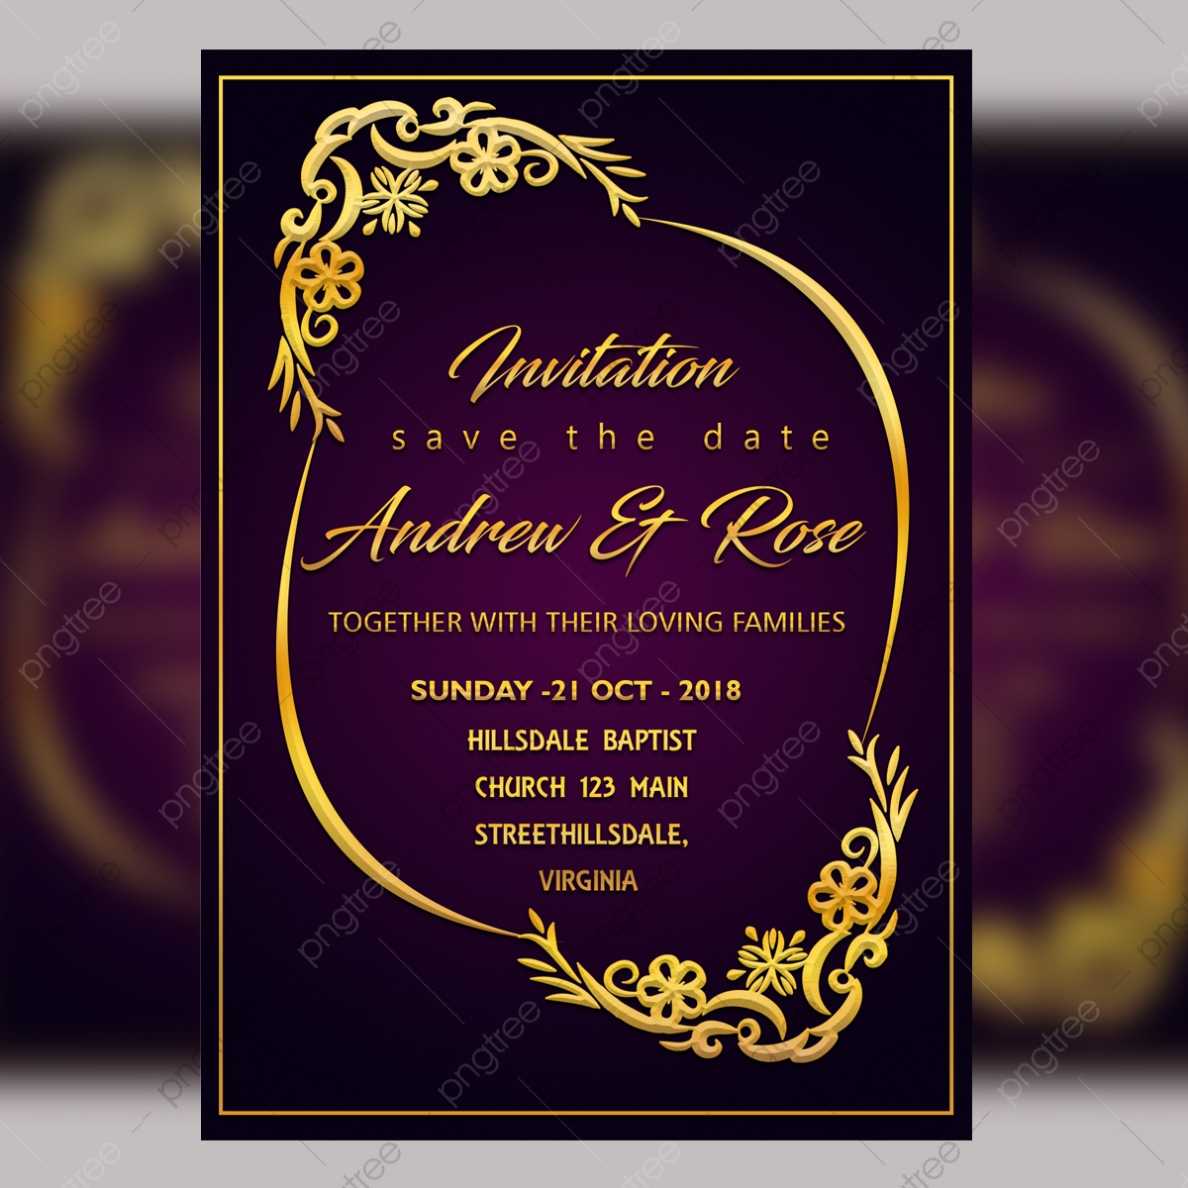 Purple Wedding Invitation Card Template Psd File With Vector regarding Invitation Cards Templates For Marriage